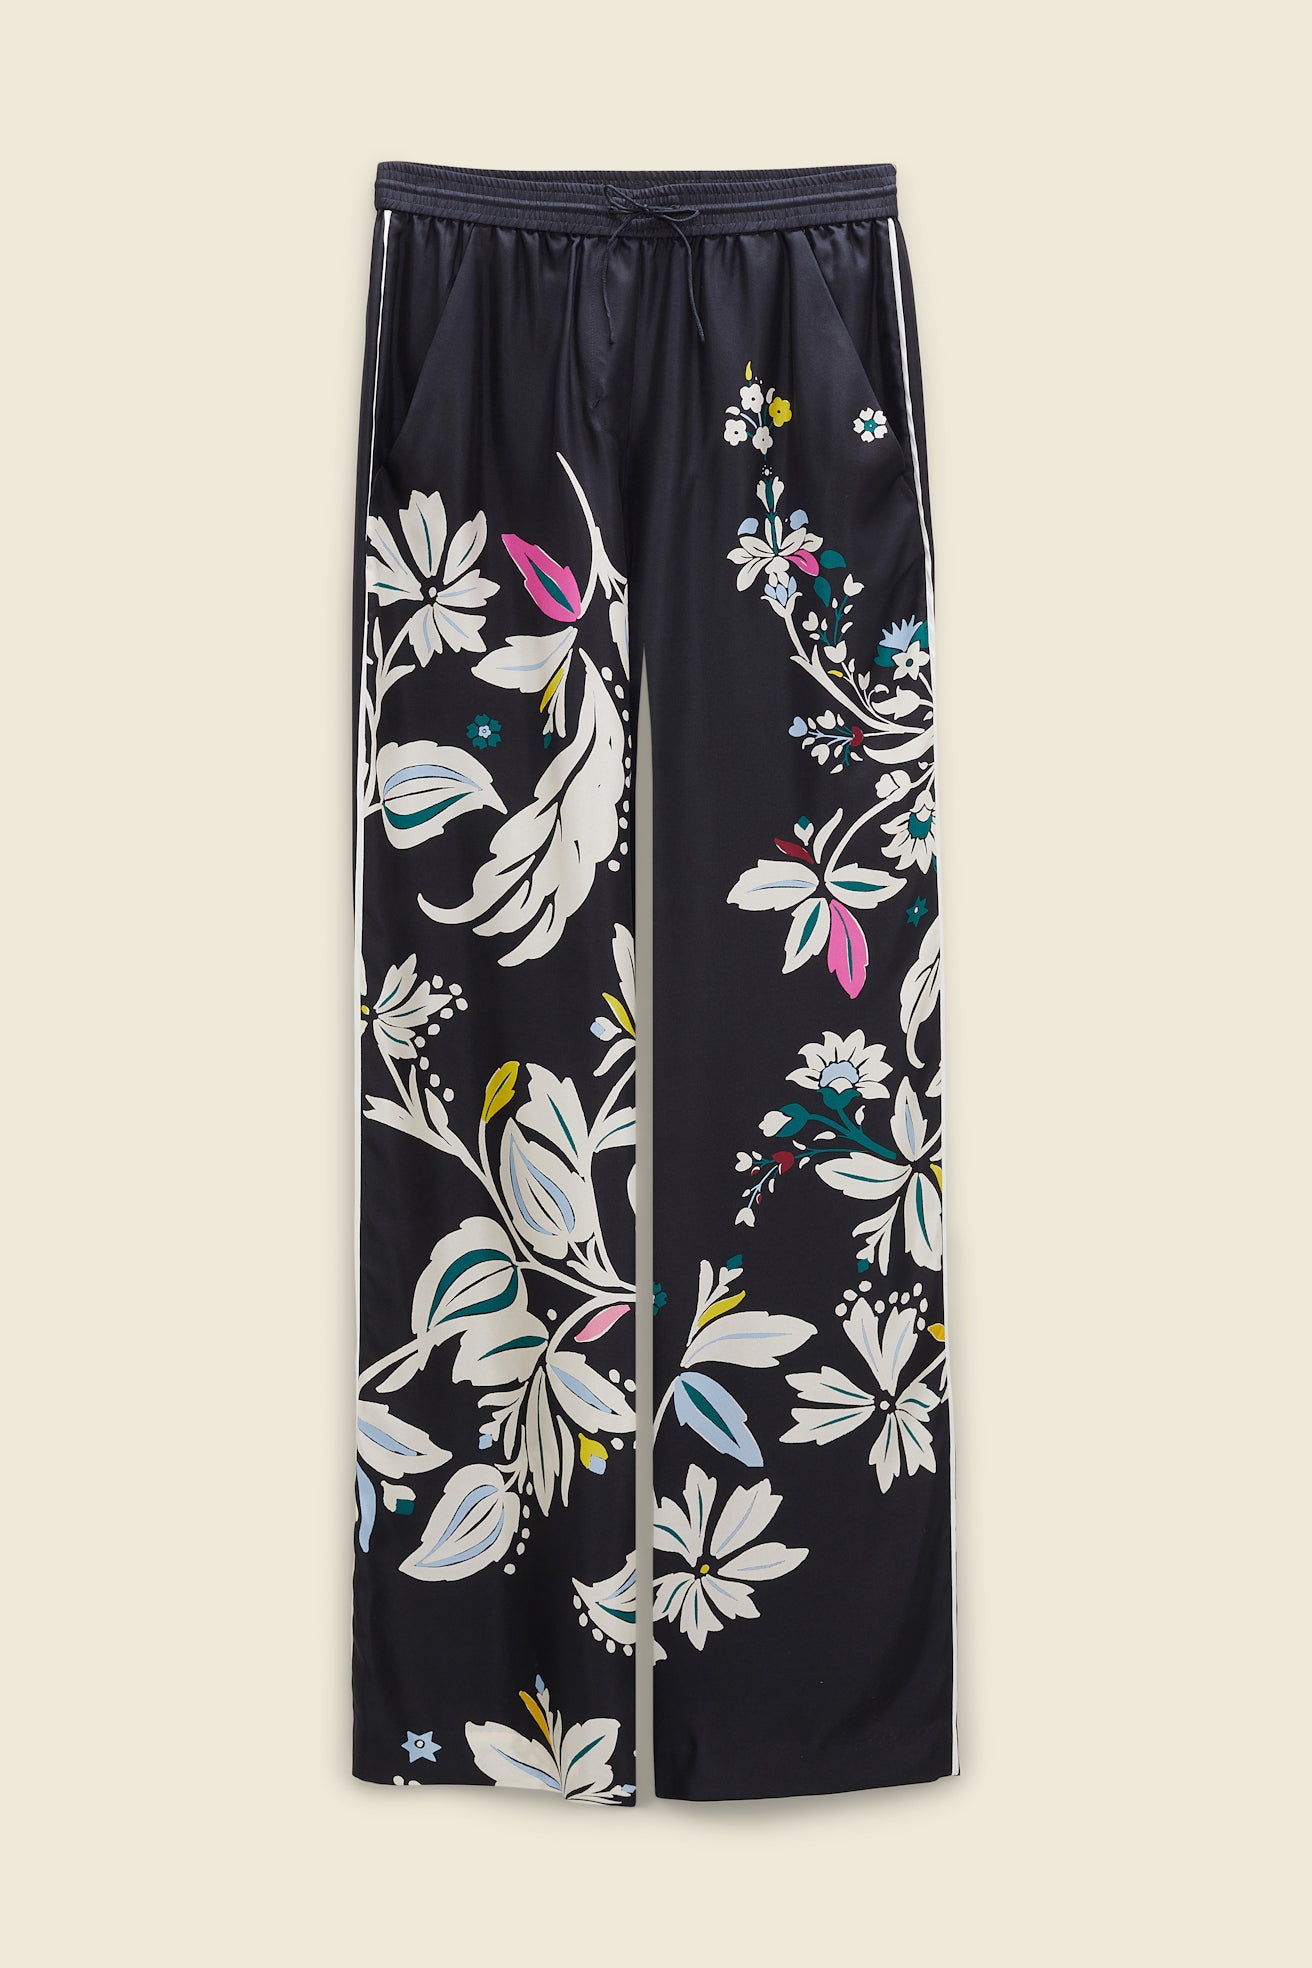 Flower whirl pants by Dorothee Schumacher